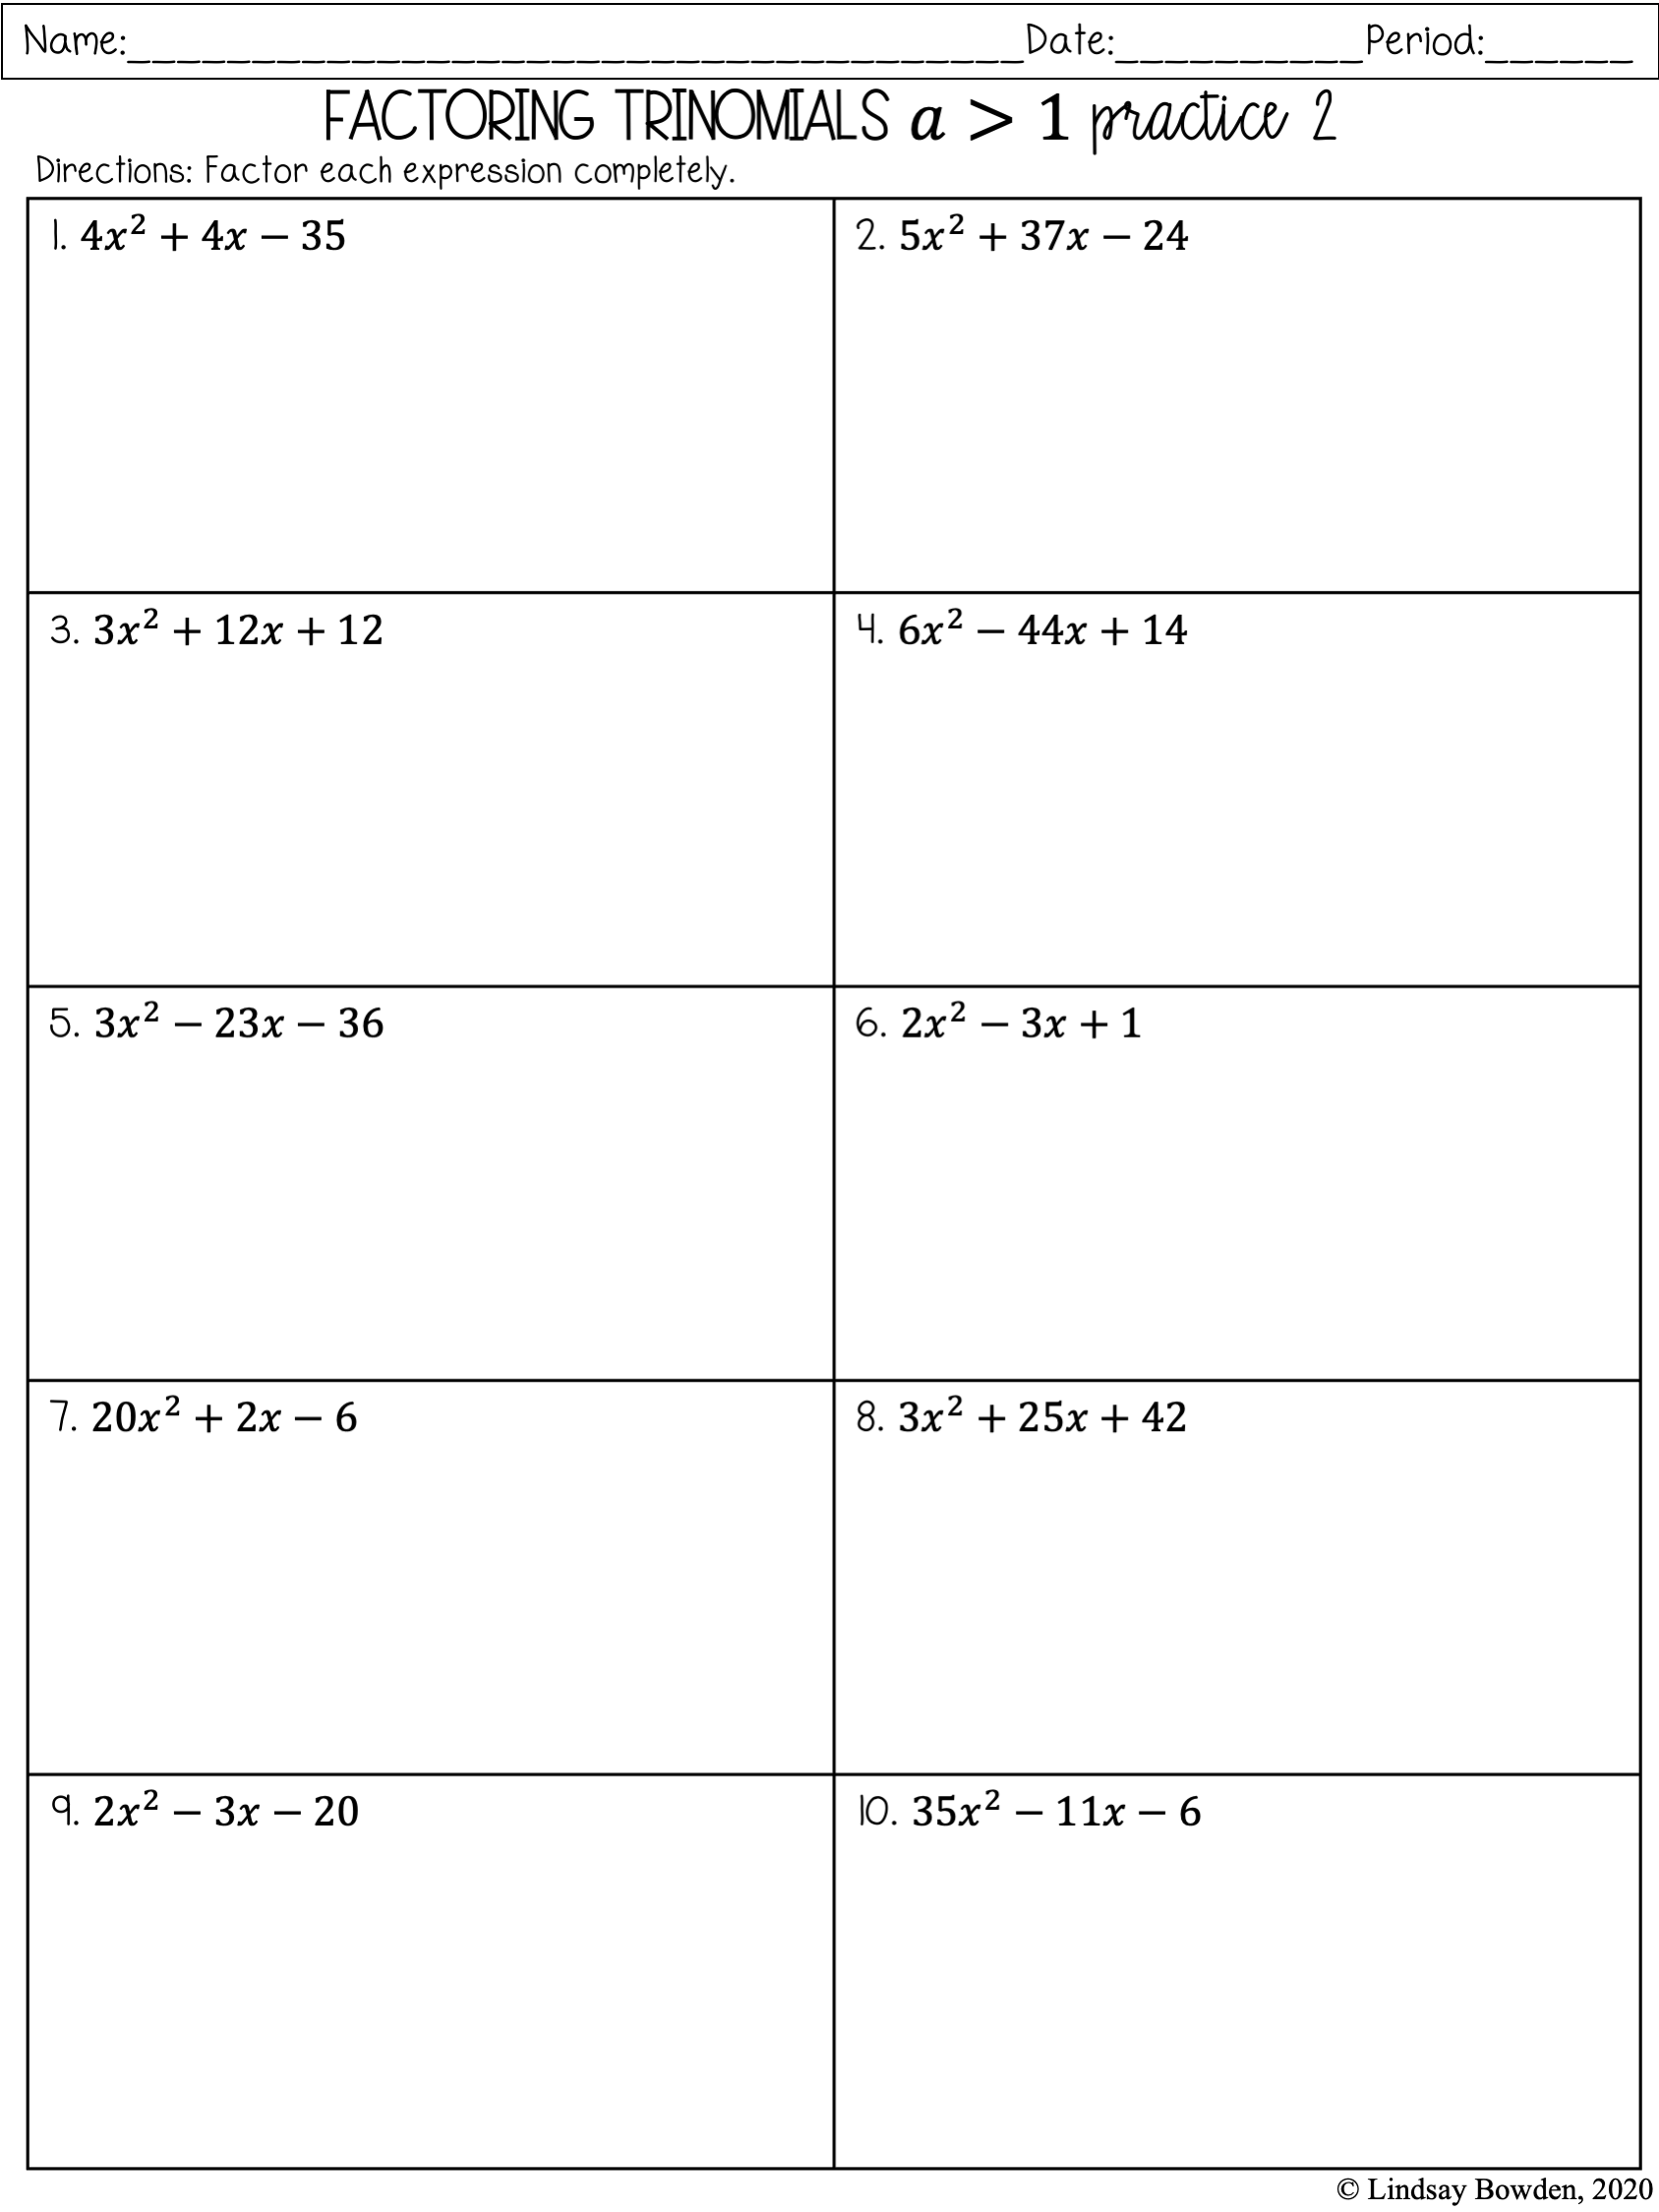 Factoring Polynomials Notes and Worksheets - Lindsay Bowden Intended For Factoring By Grouping Worksheet Answers